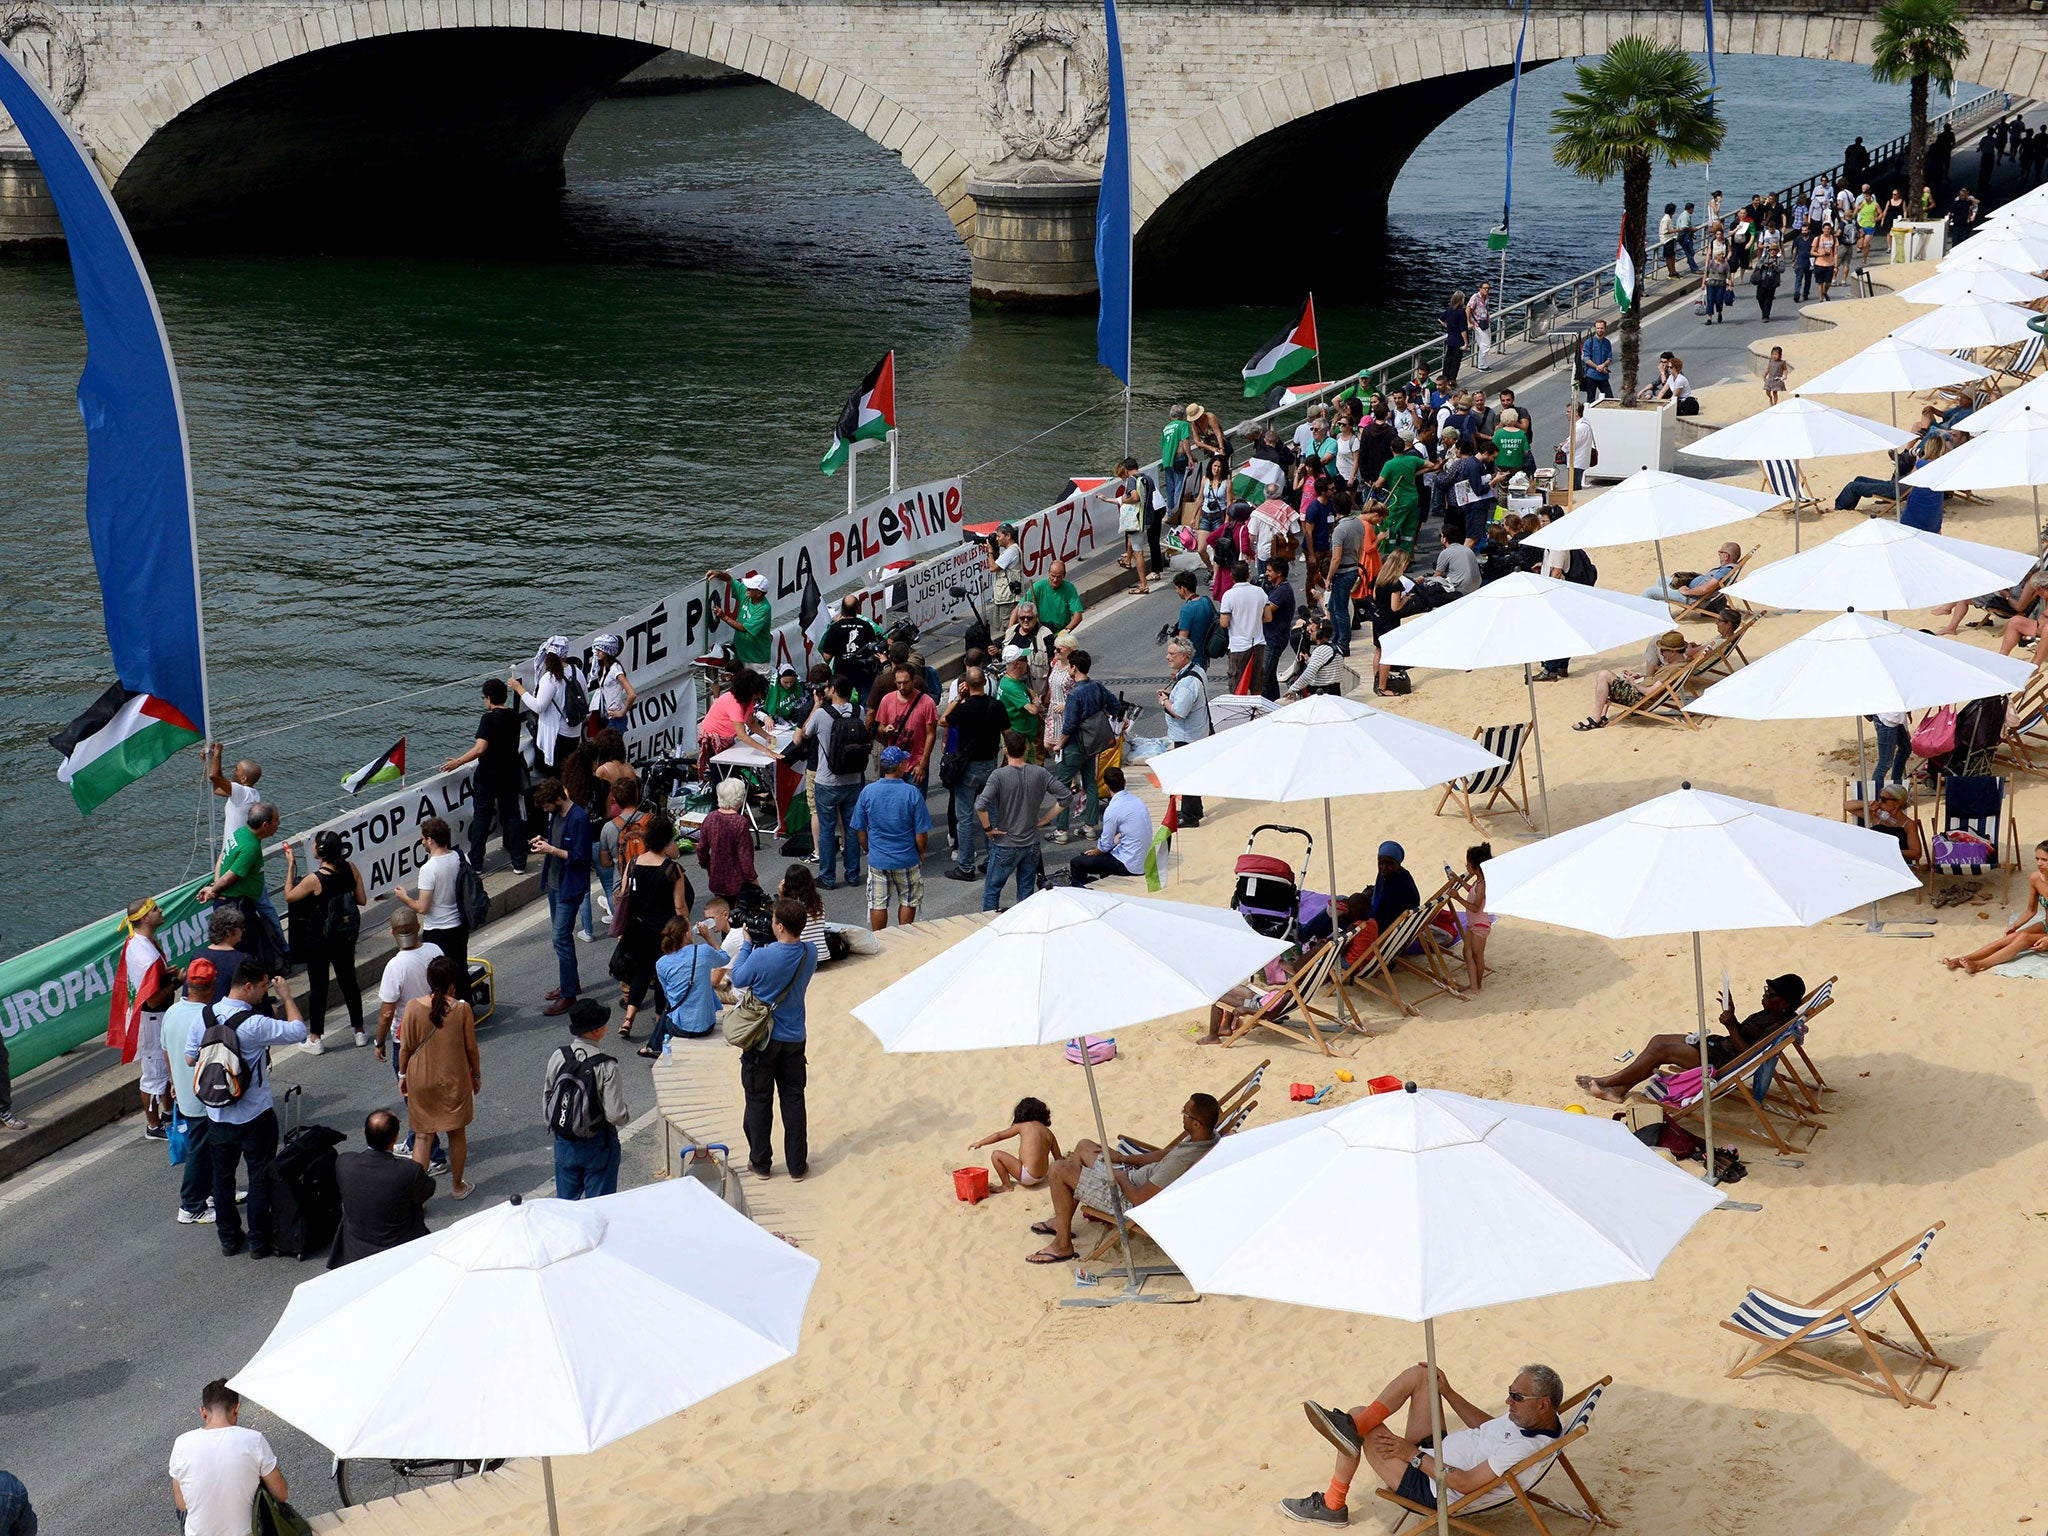 Palestinian supporters hold placards in front of people sunbathing at Tel Aviv sur Seine in Paris